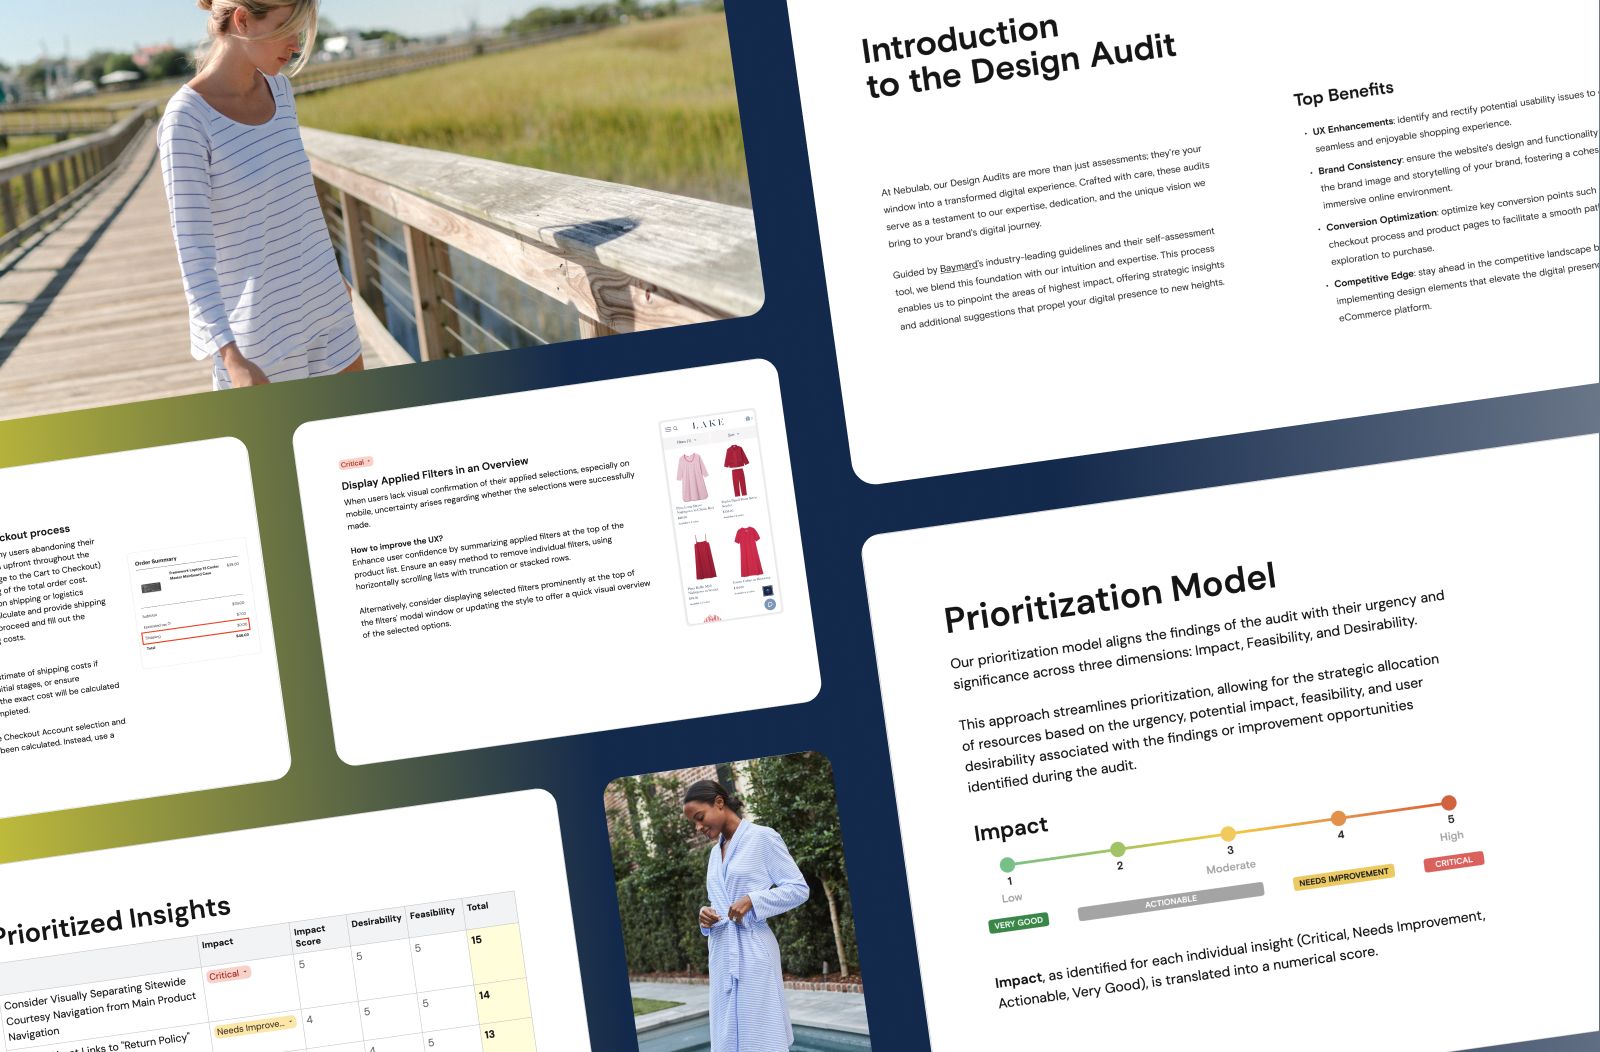 How we conduct a design audit at Nebulab